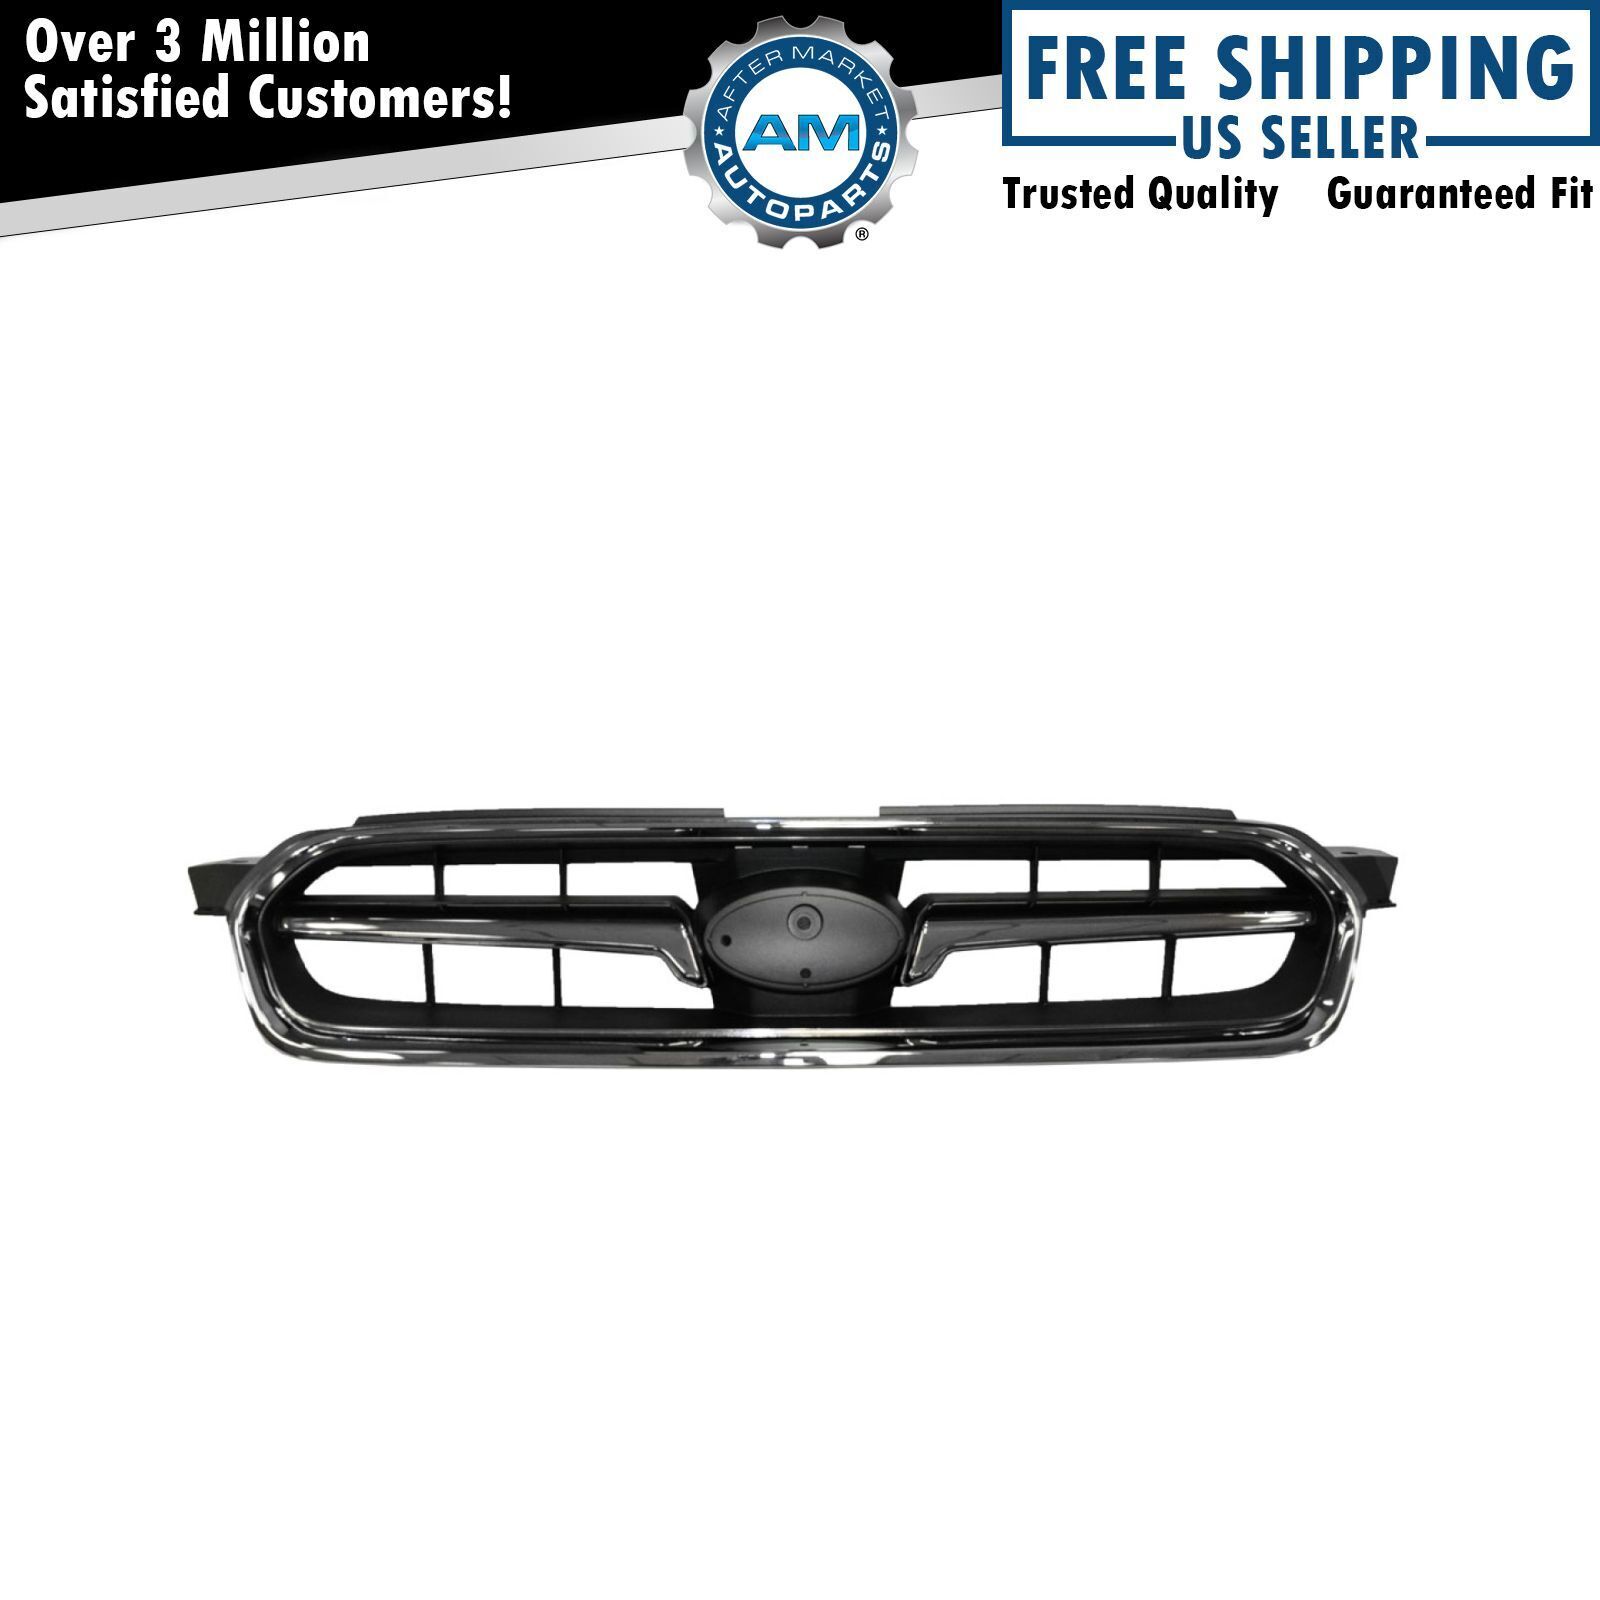 Chrome & Black Front Grille 91121AG12B NEW for 05-07 Subaru Legacy NEW